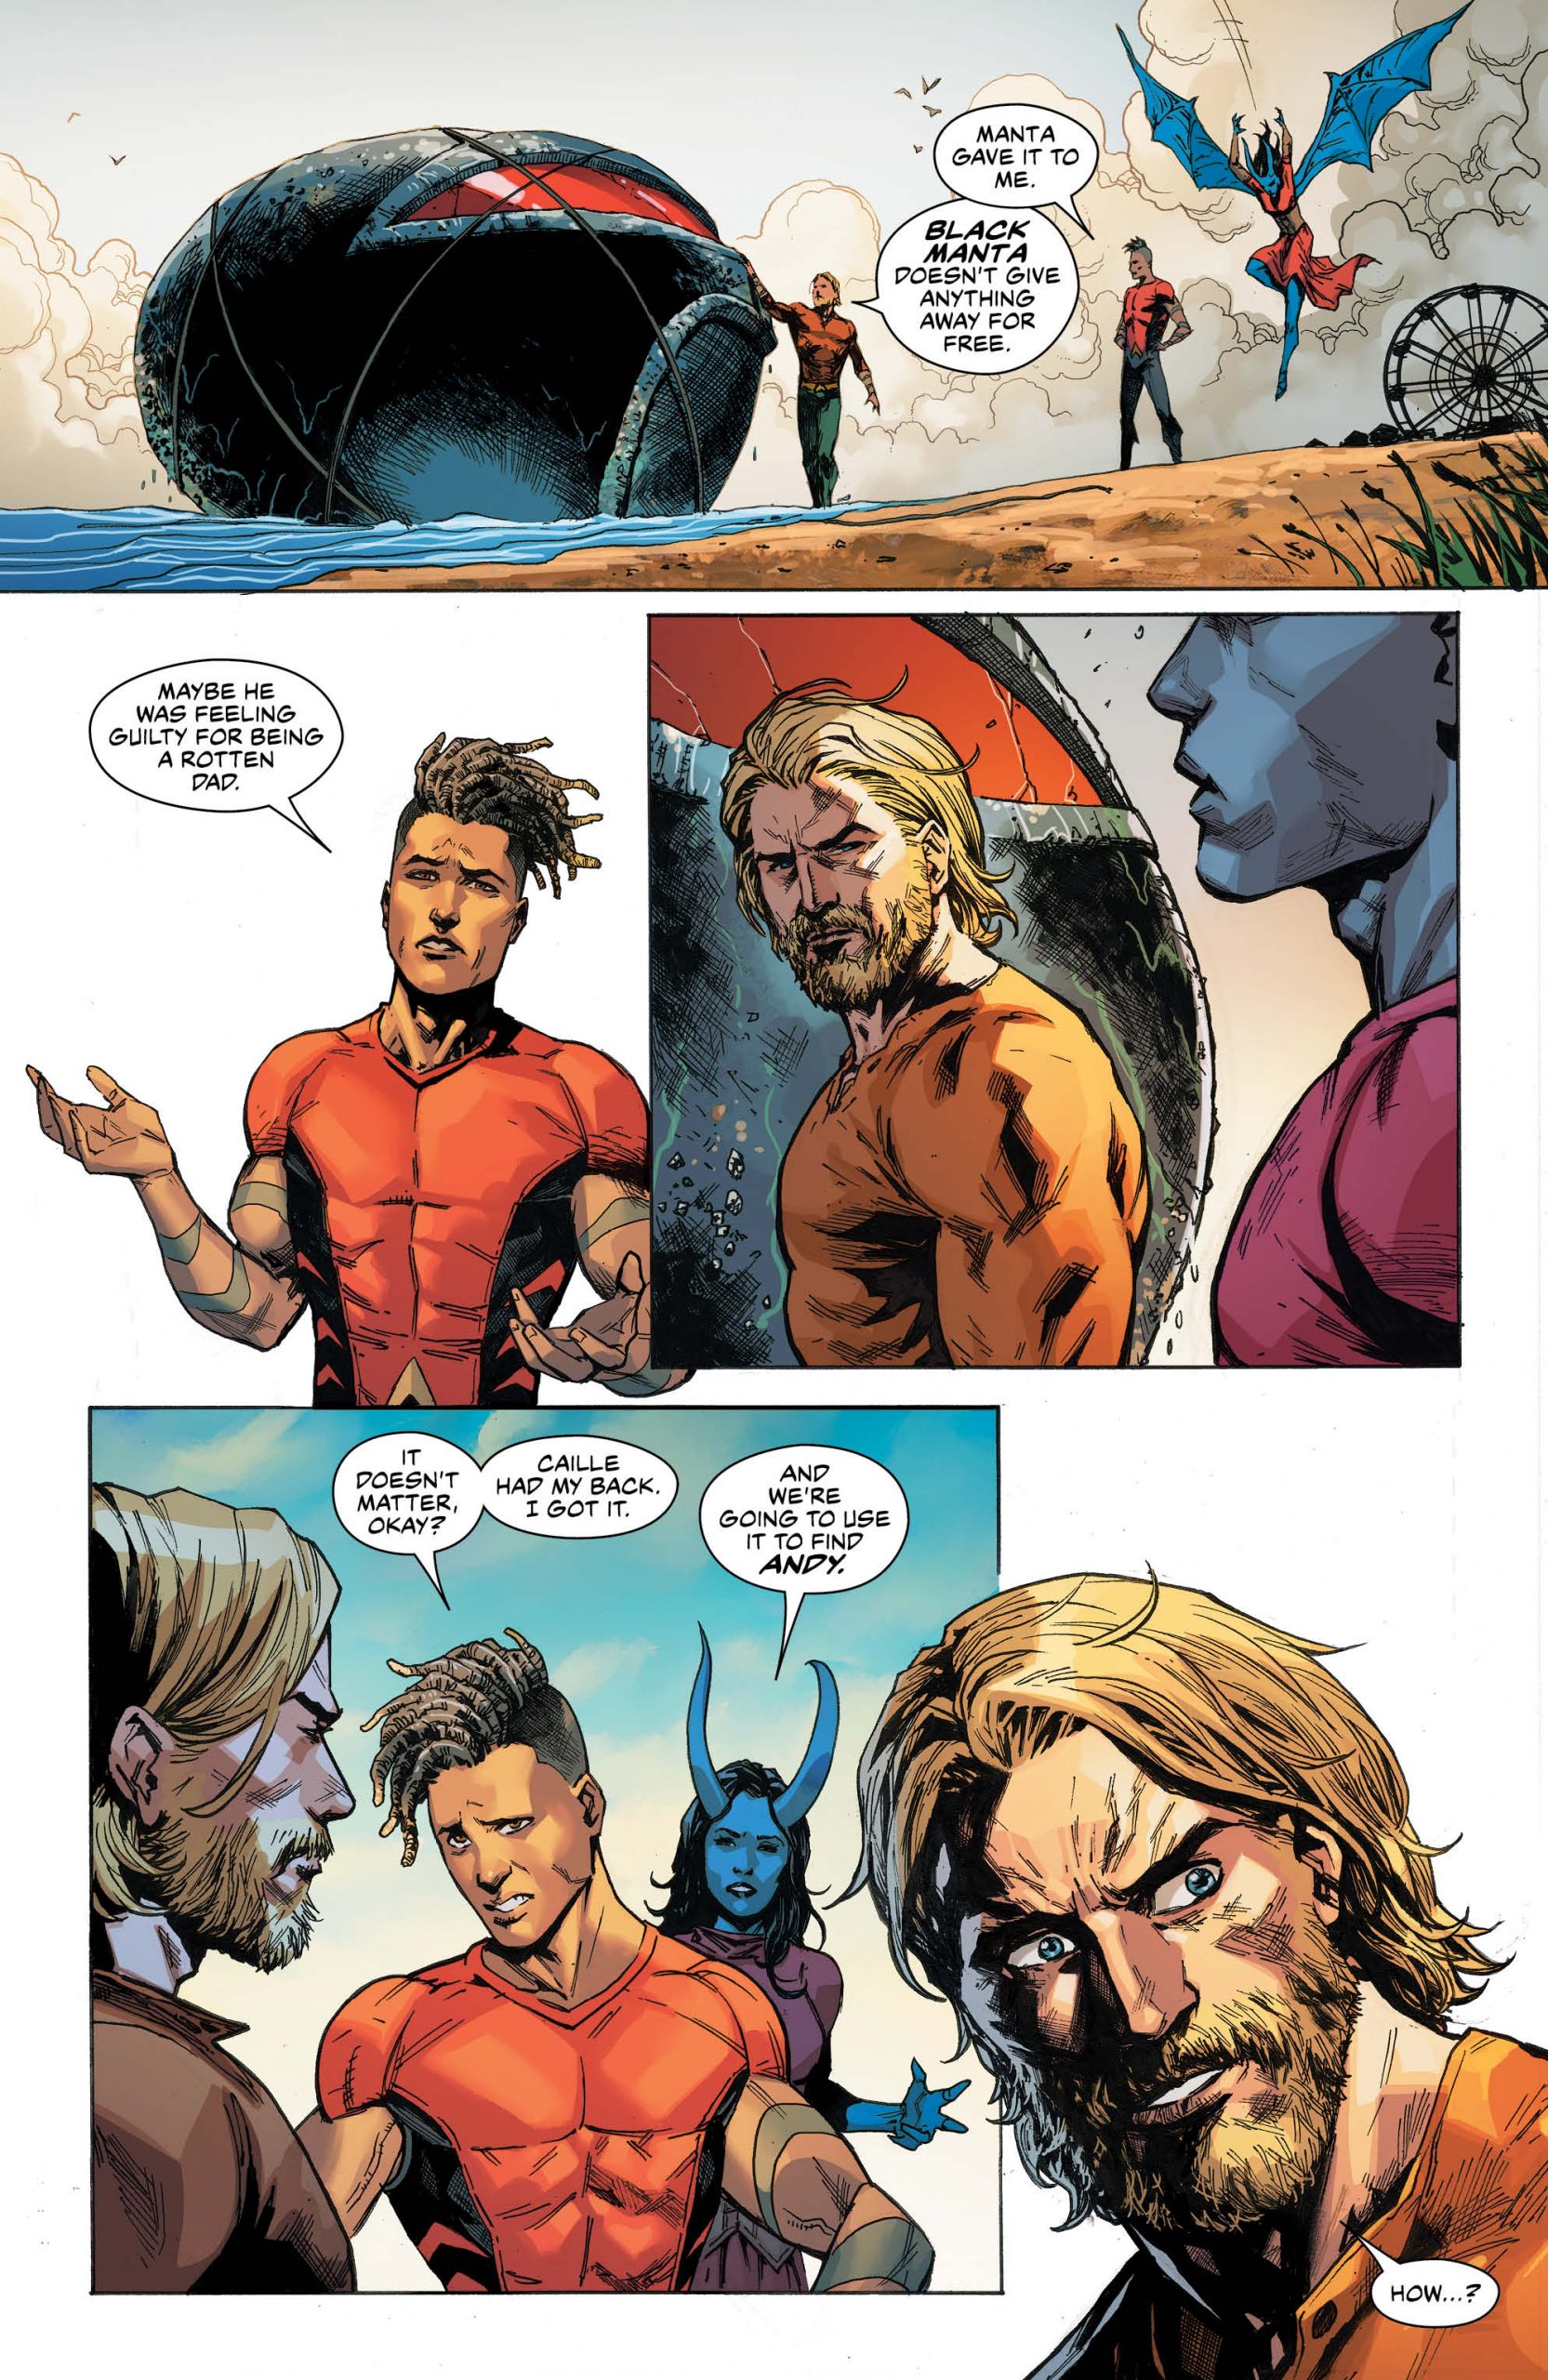 Aquaman, Caille and Jackson planning rescue